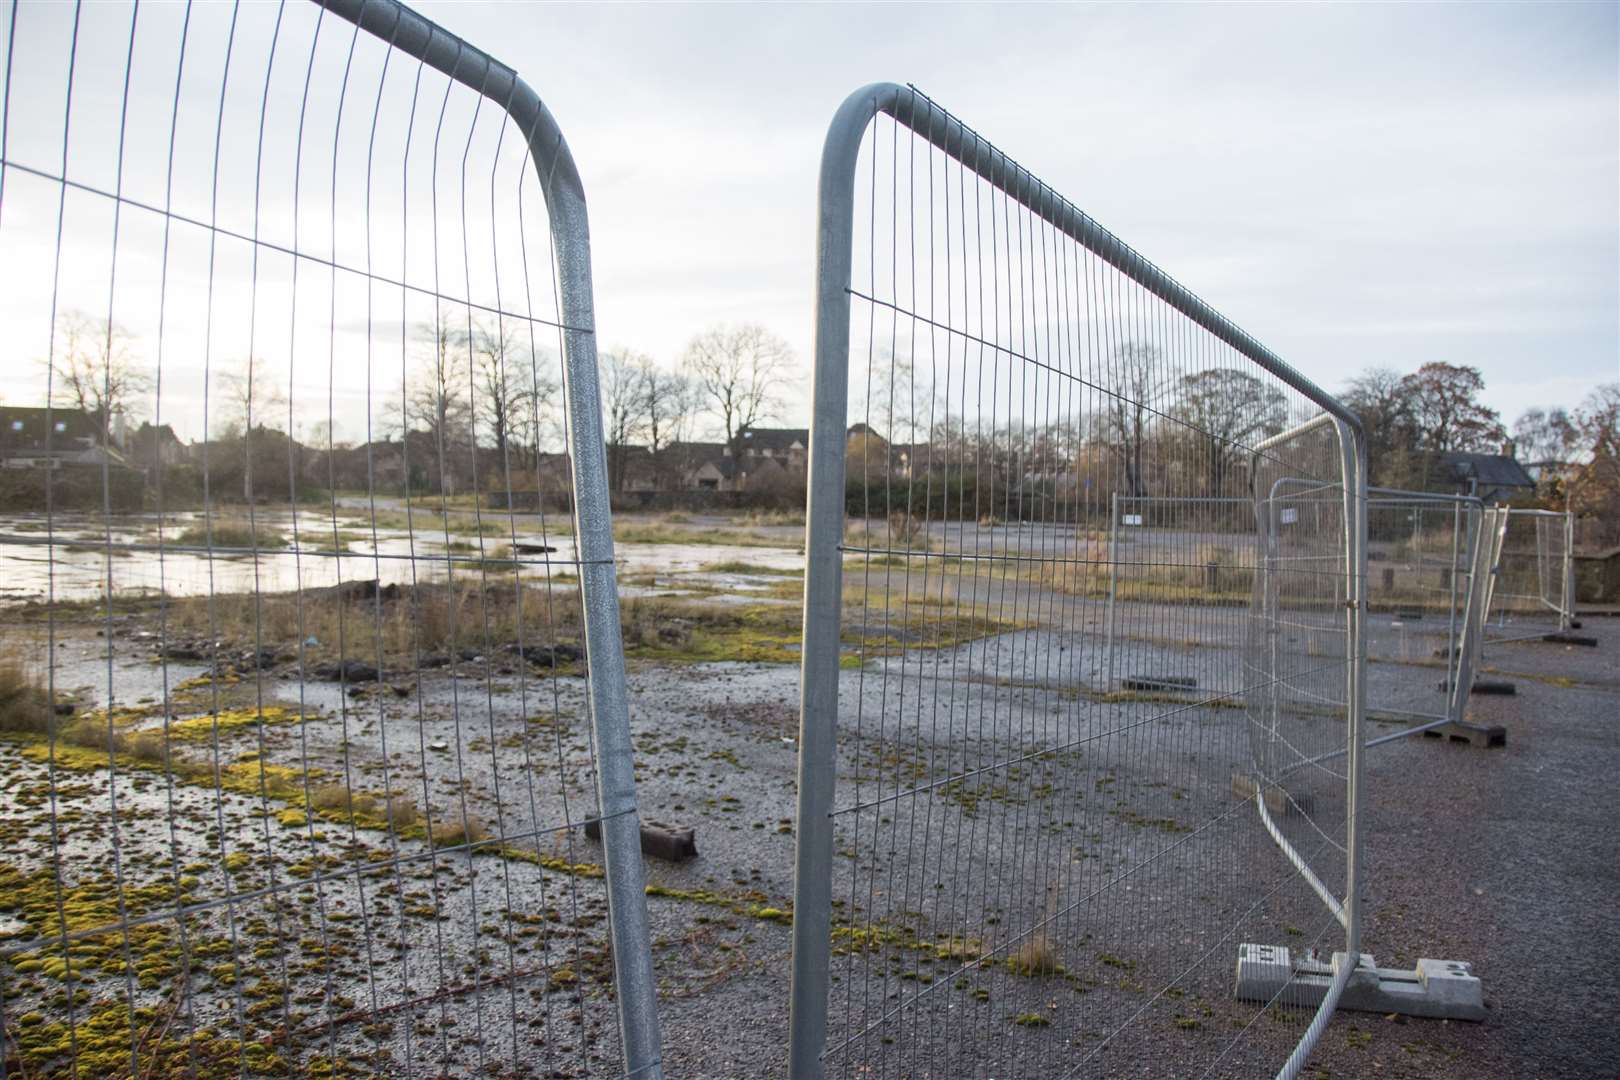 Land previously occupied by Tesco has lain derelict for decades.